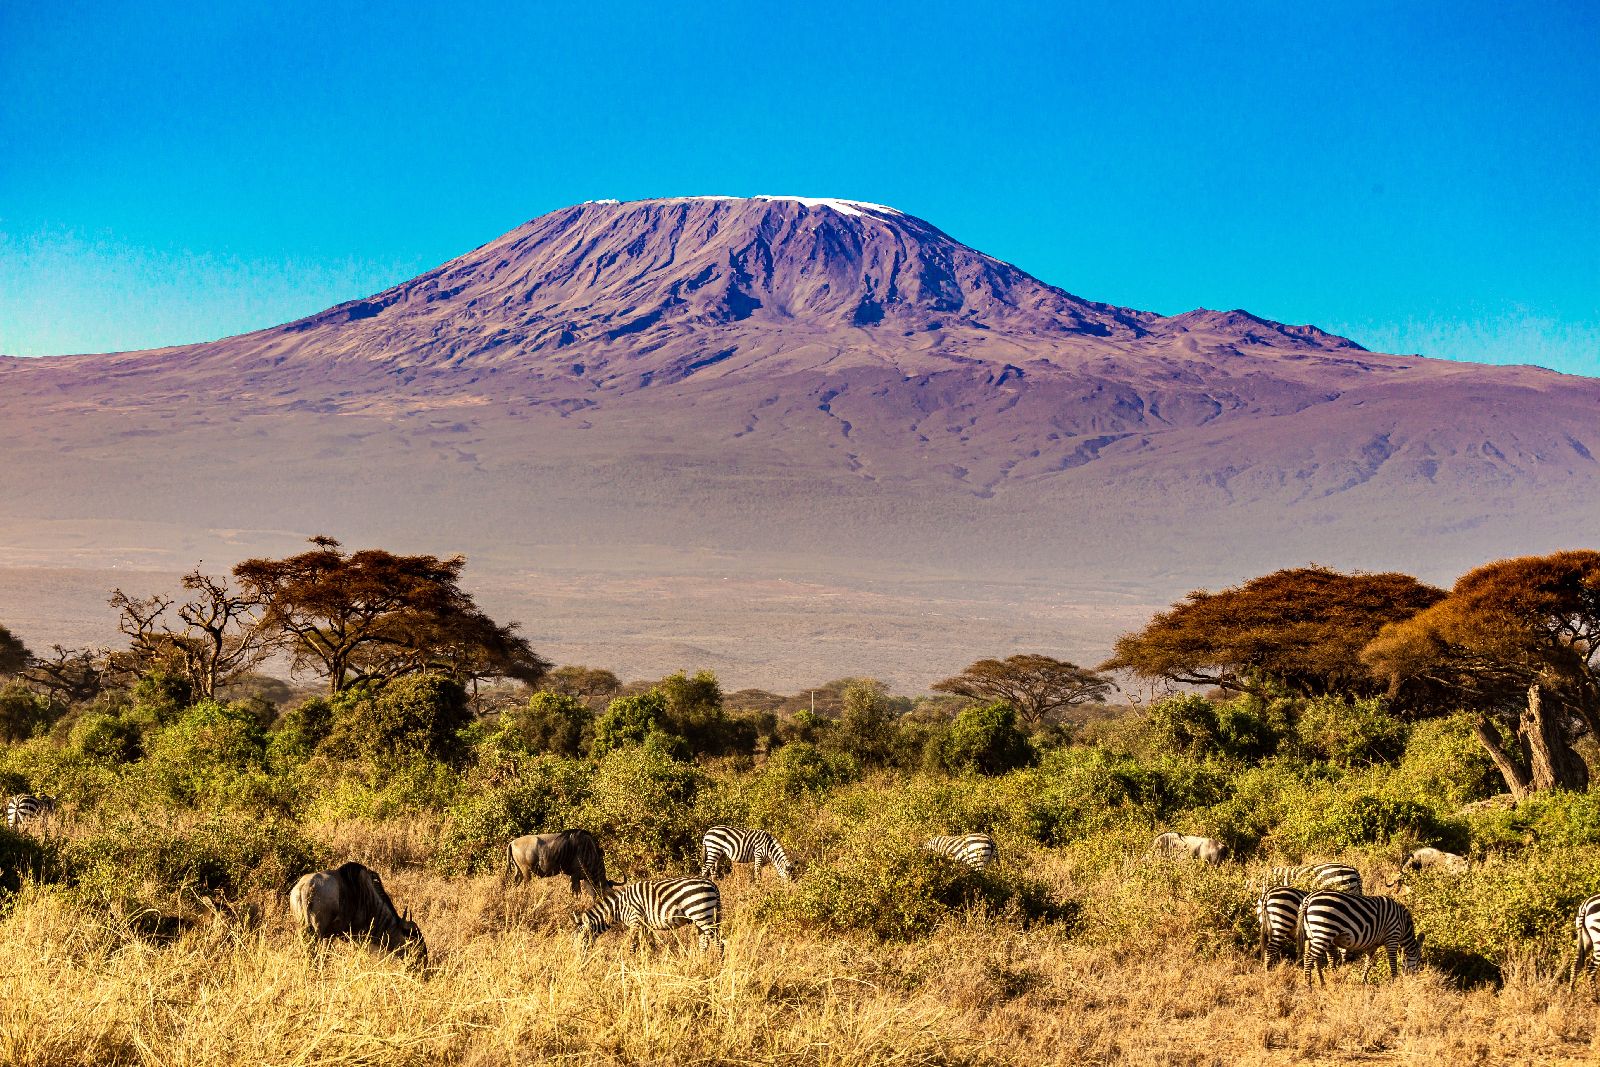 Zebra and wildebeest grazing in the shadow of Mount Kilimanjaro in Tanzania